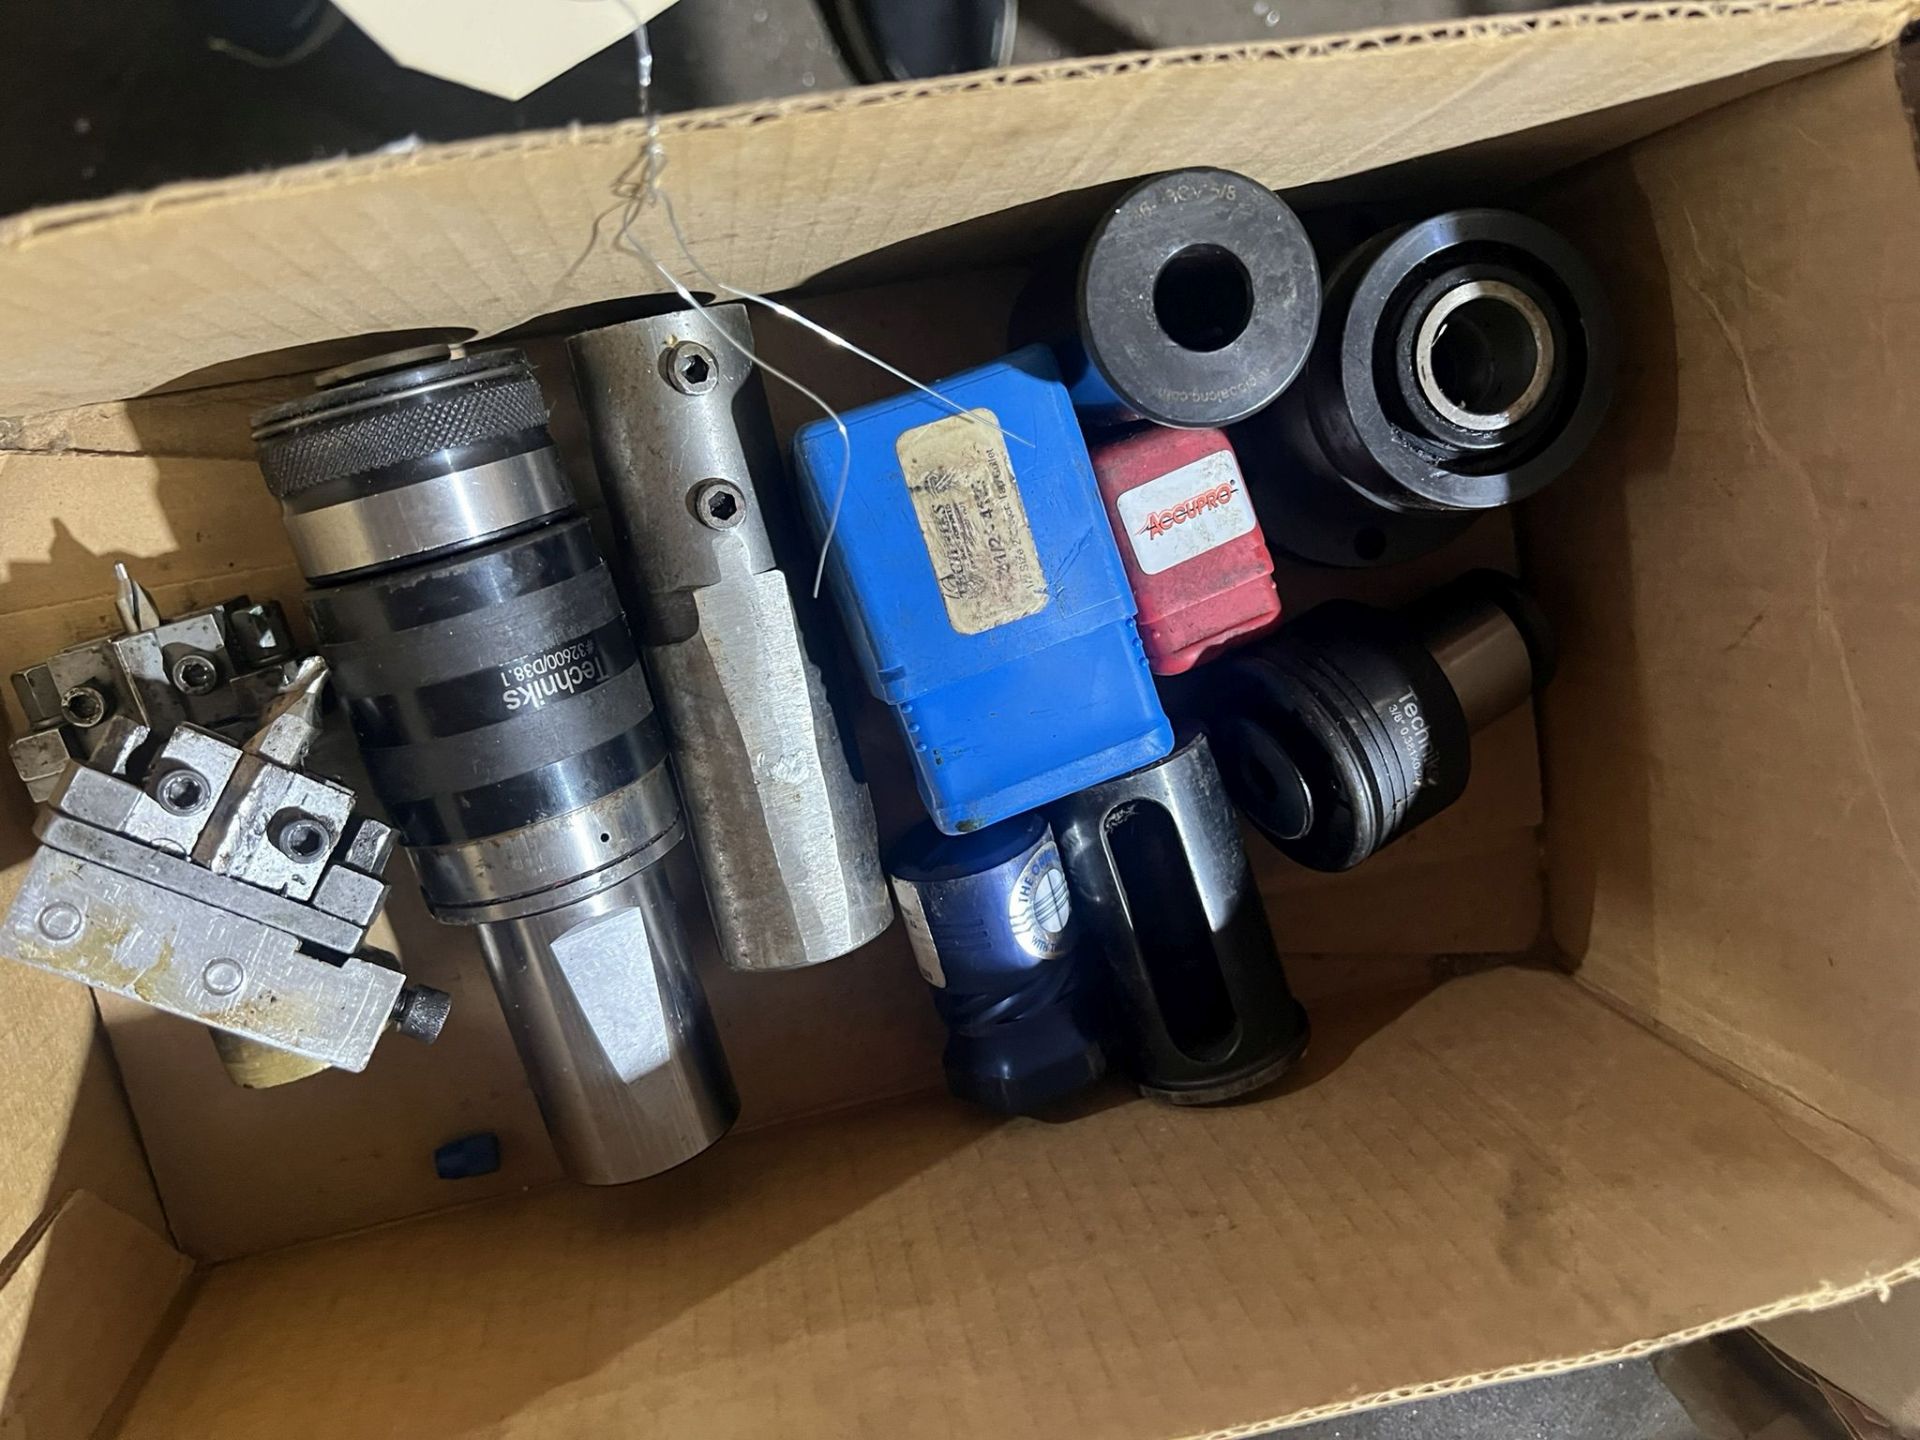 Box of Assorted Tooling & Holders